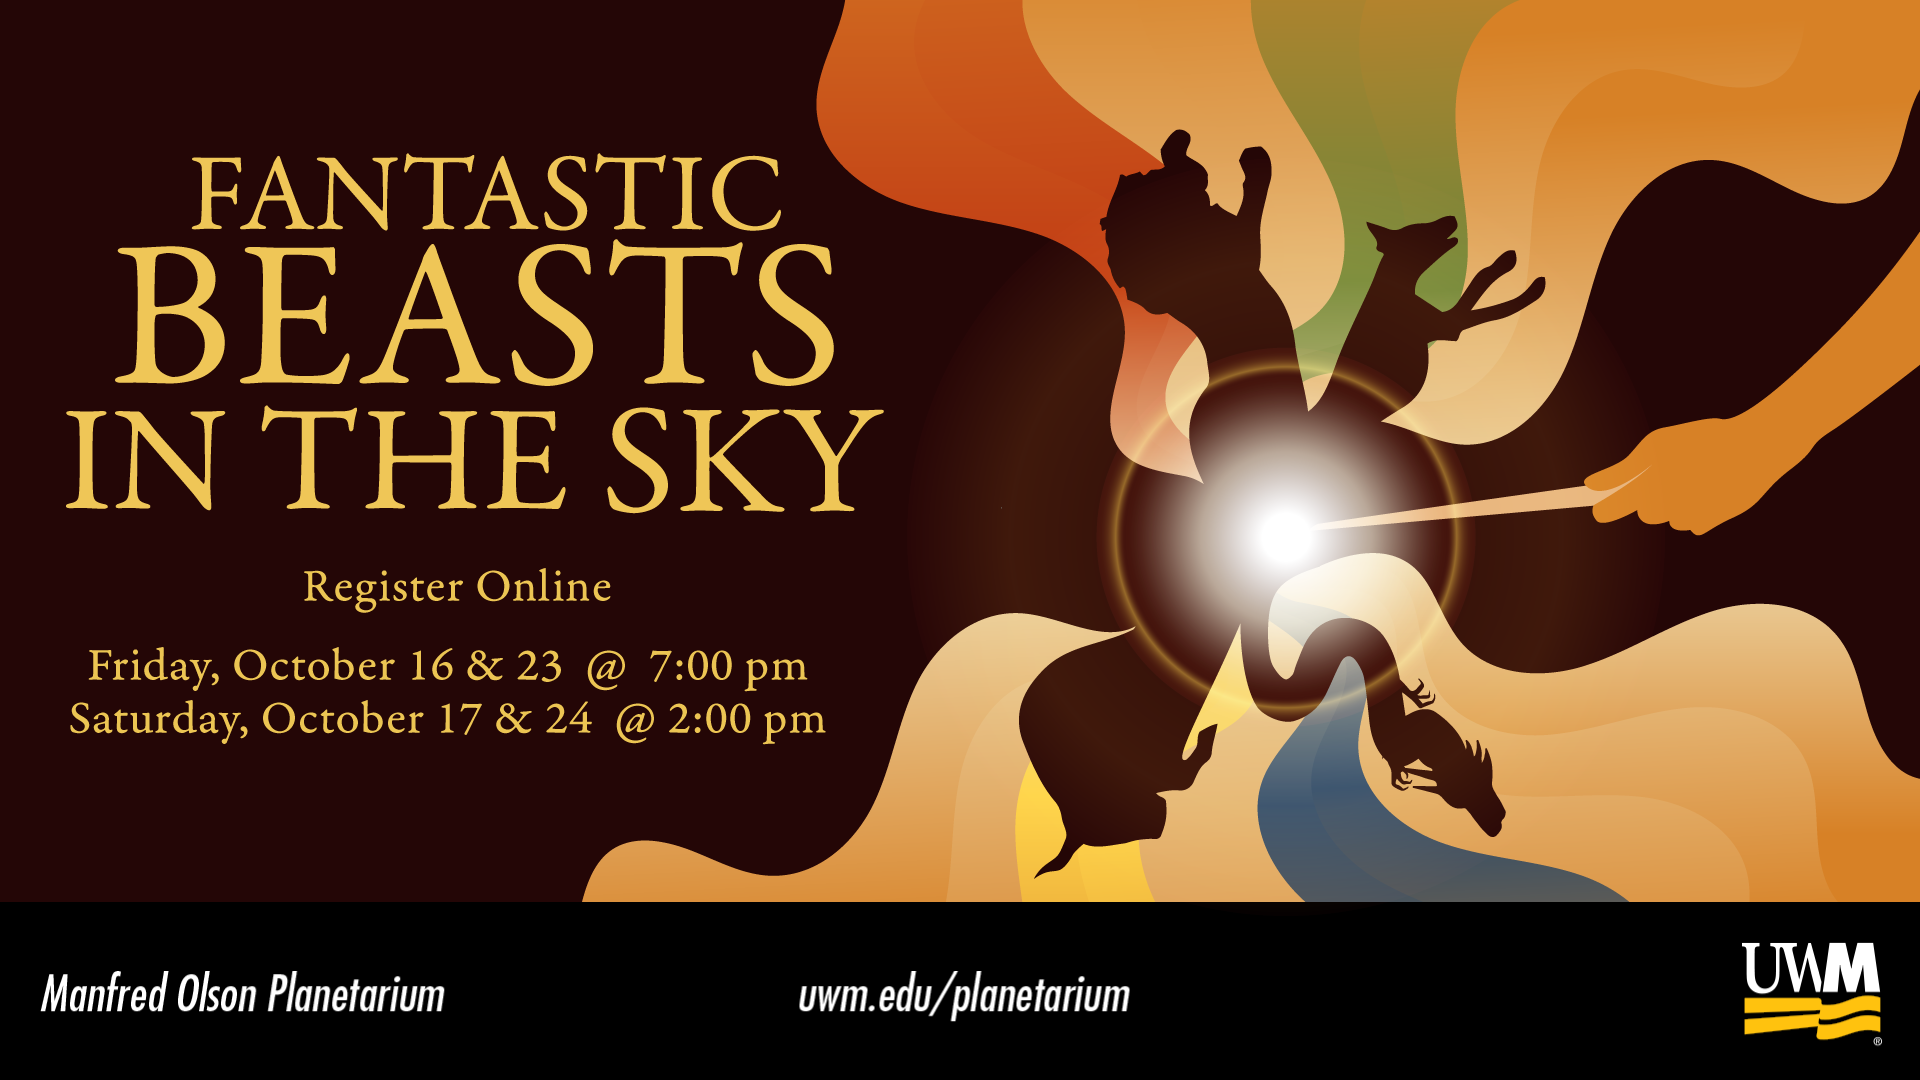 Fantastic Beasts in the Sky